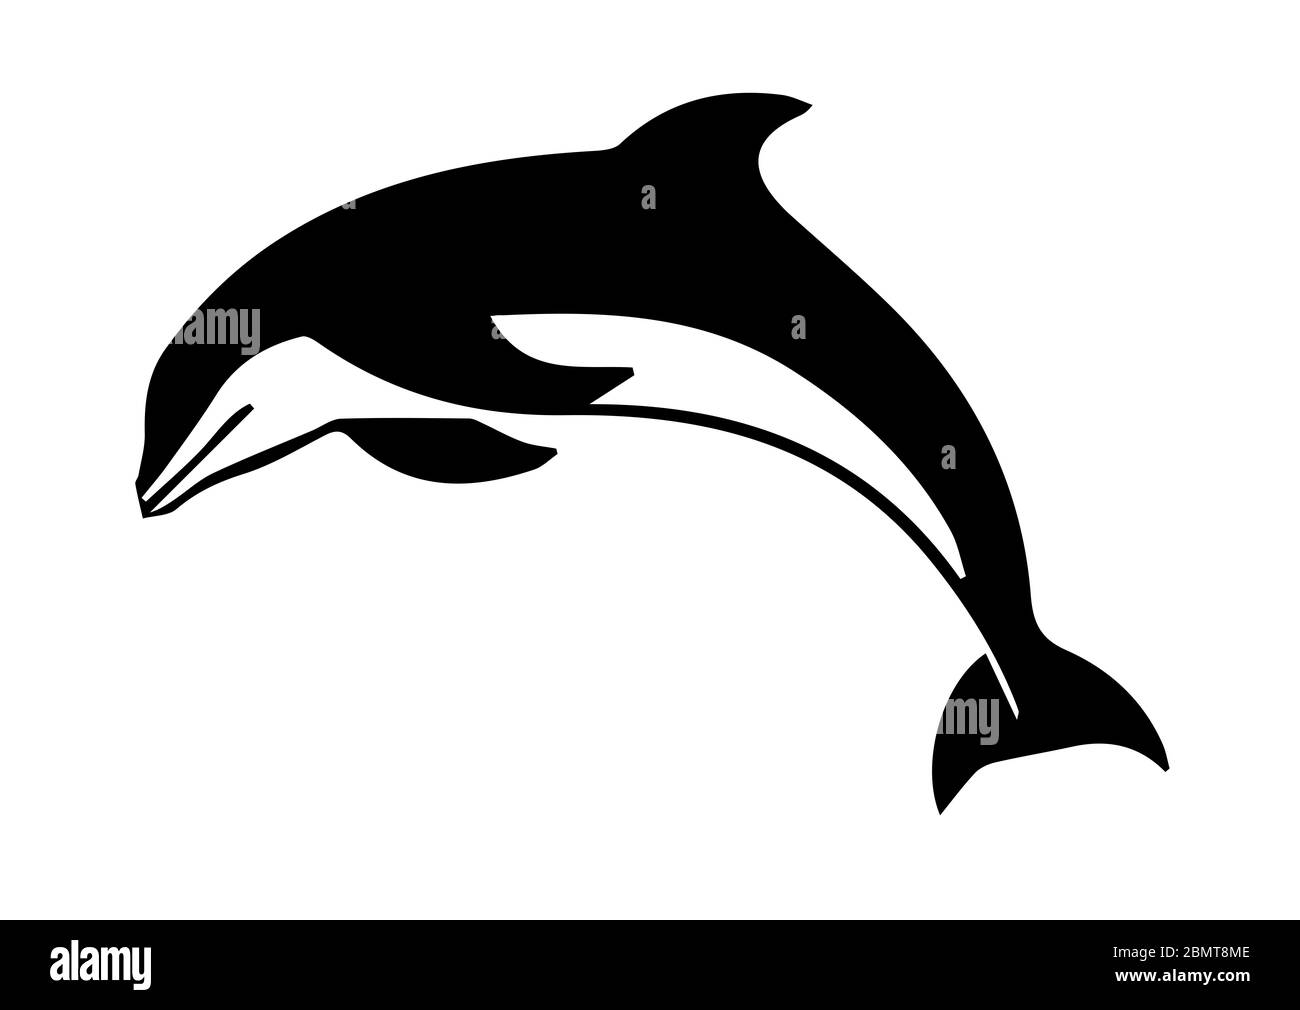 Silhouette of dolphin fish on white background Stock Photo